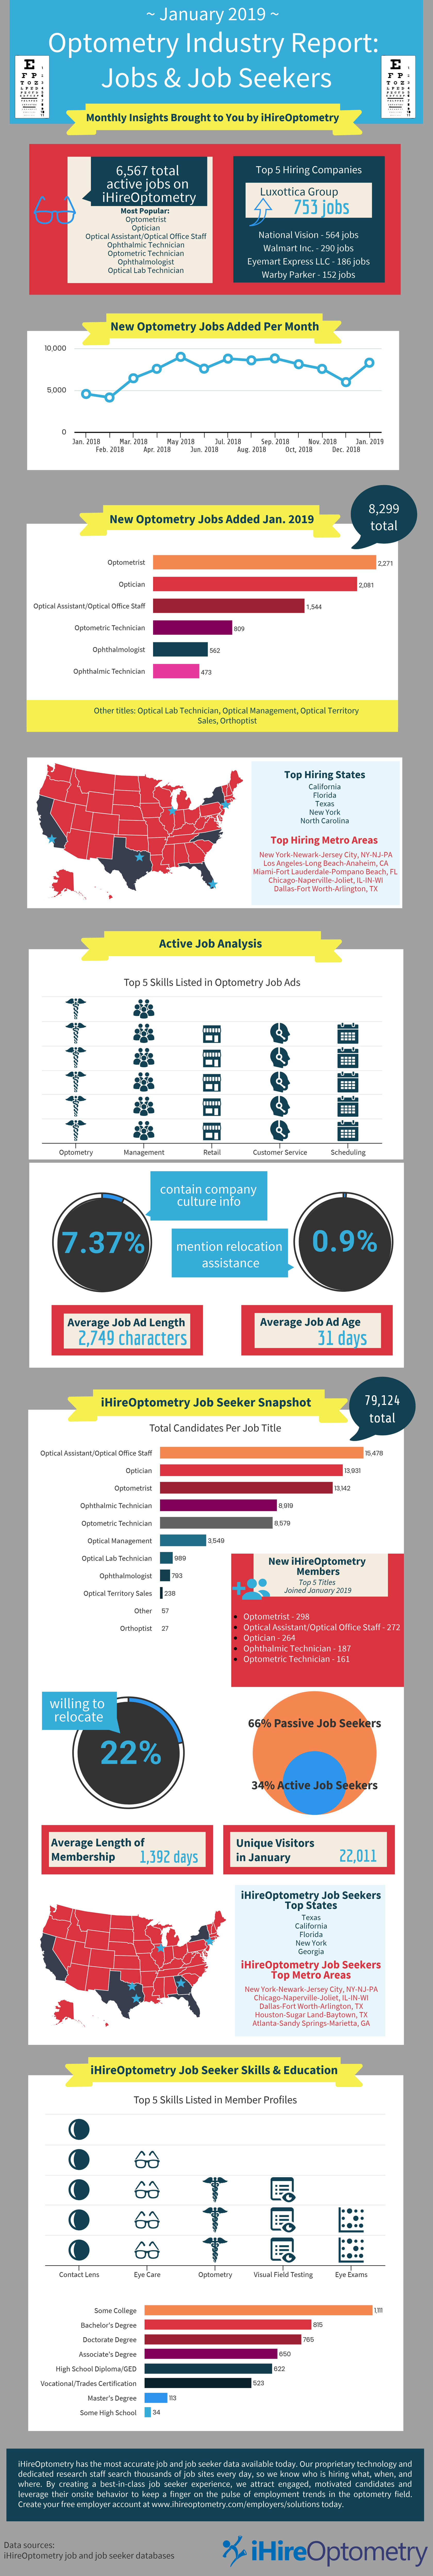 iHireOptometry’s eye care industry overview for January 2019. Infographic.